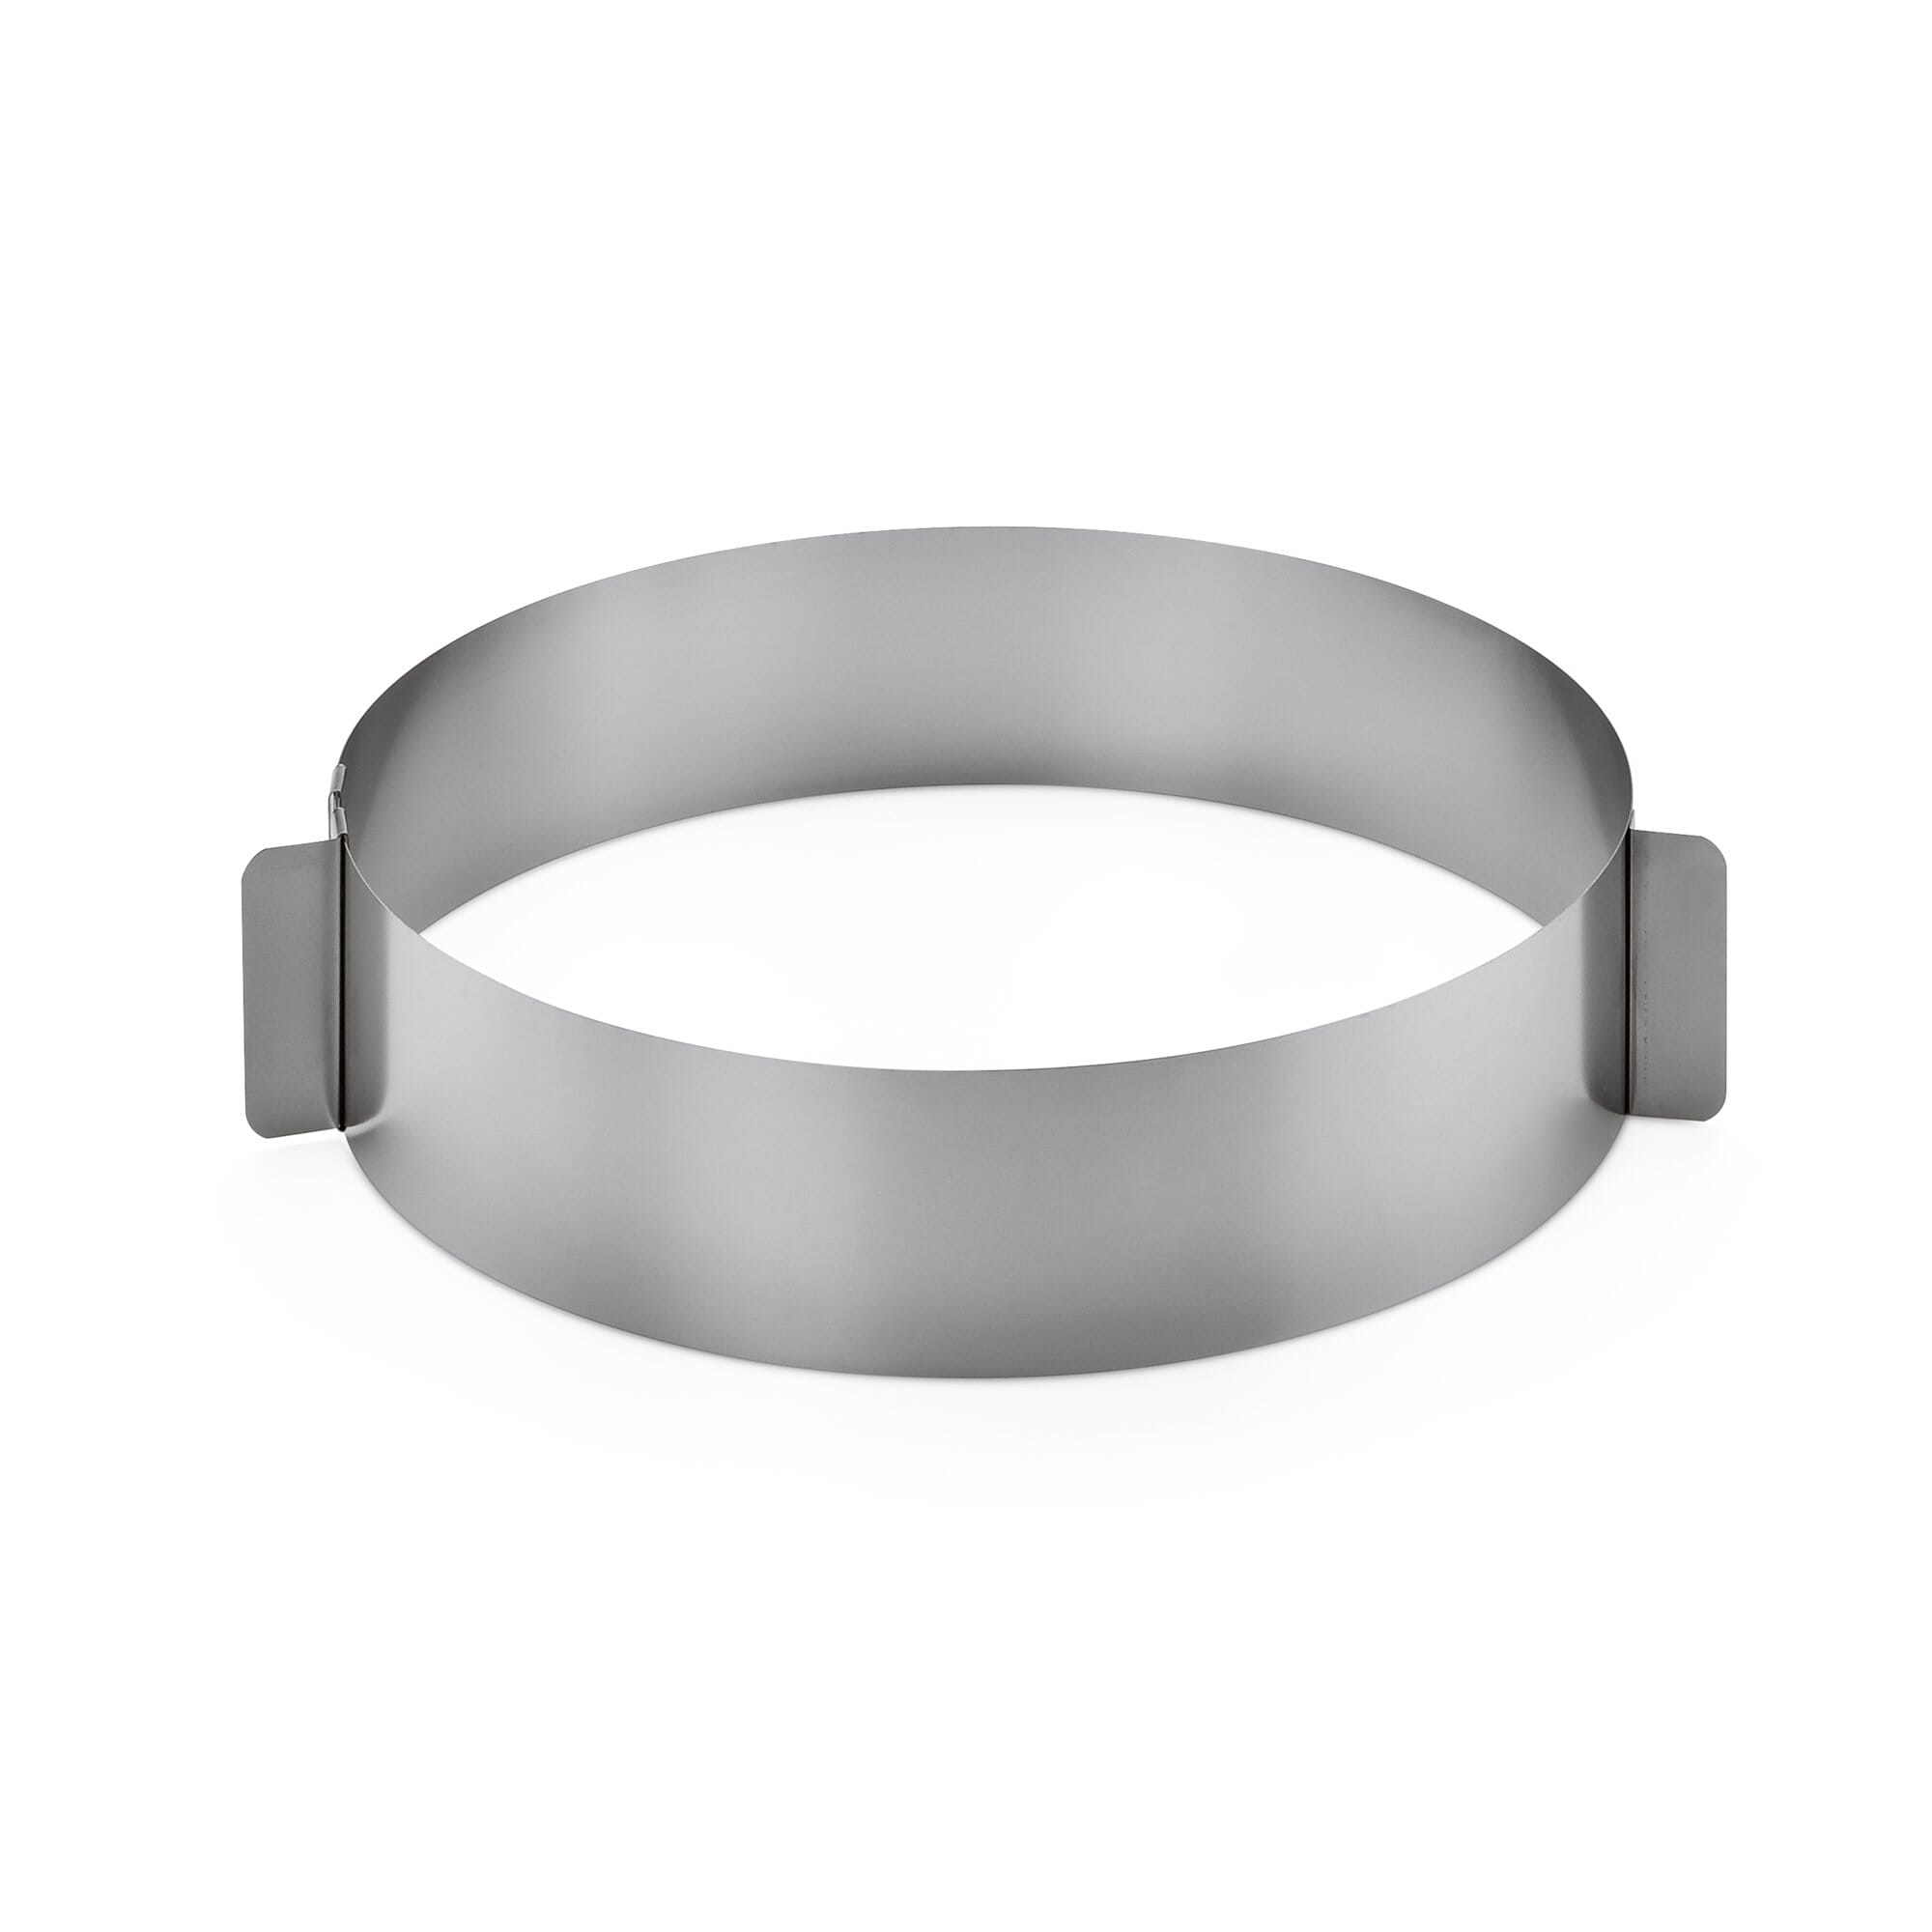 FAT DADDIO STAINLESS STEEL PASTRY RING 8